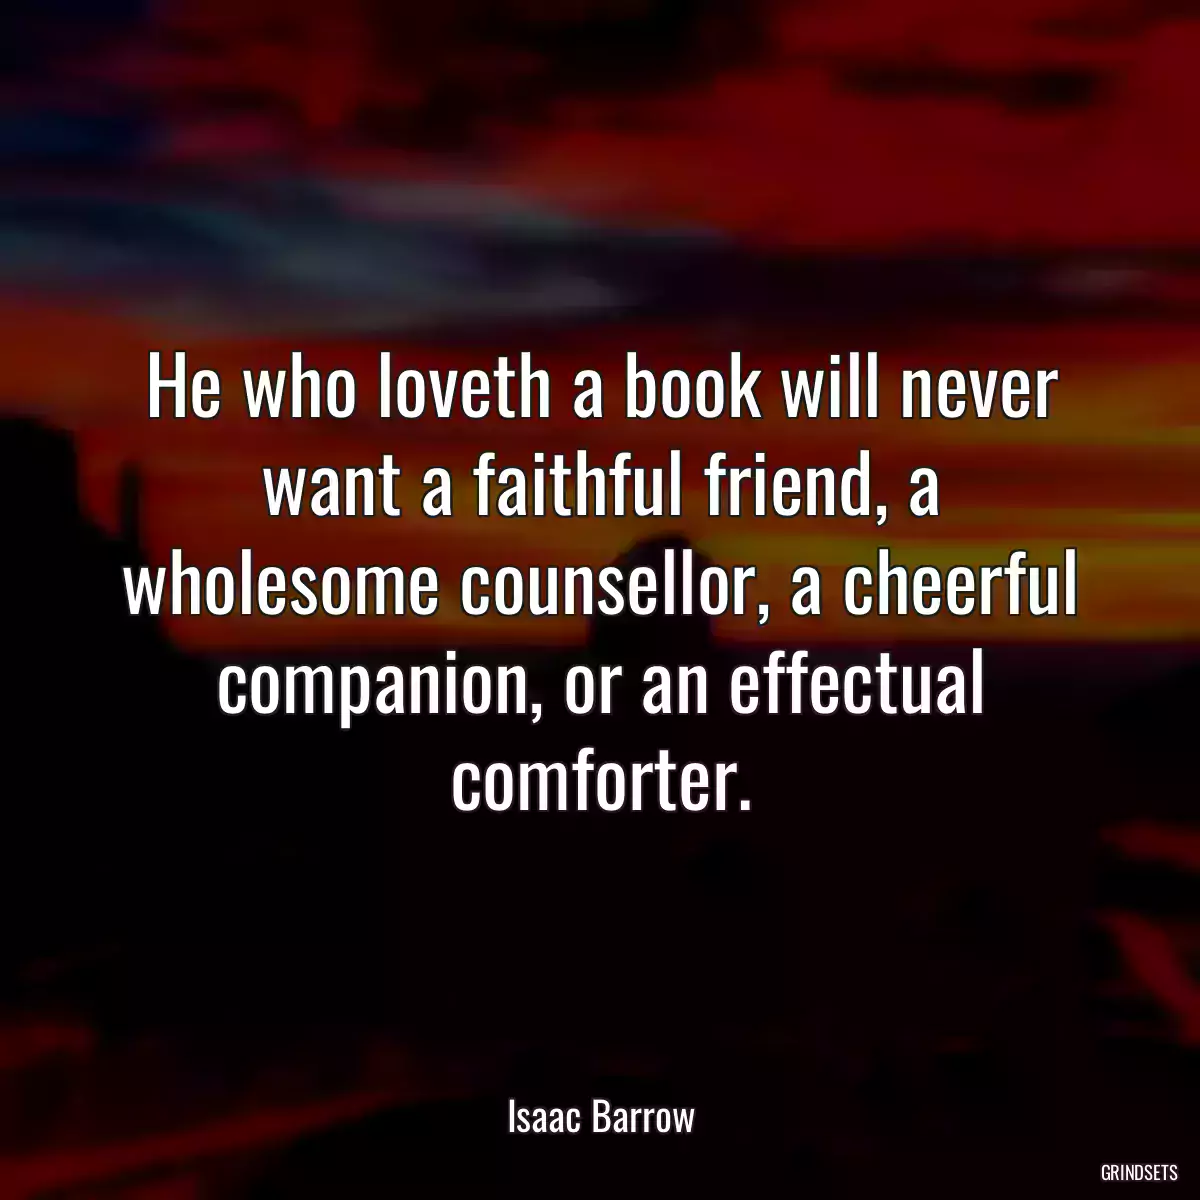 He who loveth a book will never want a faithful friend, a wholesome counsellor, a cheerful companion, or an effectual comforter.